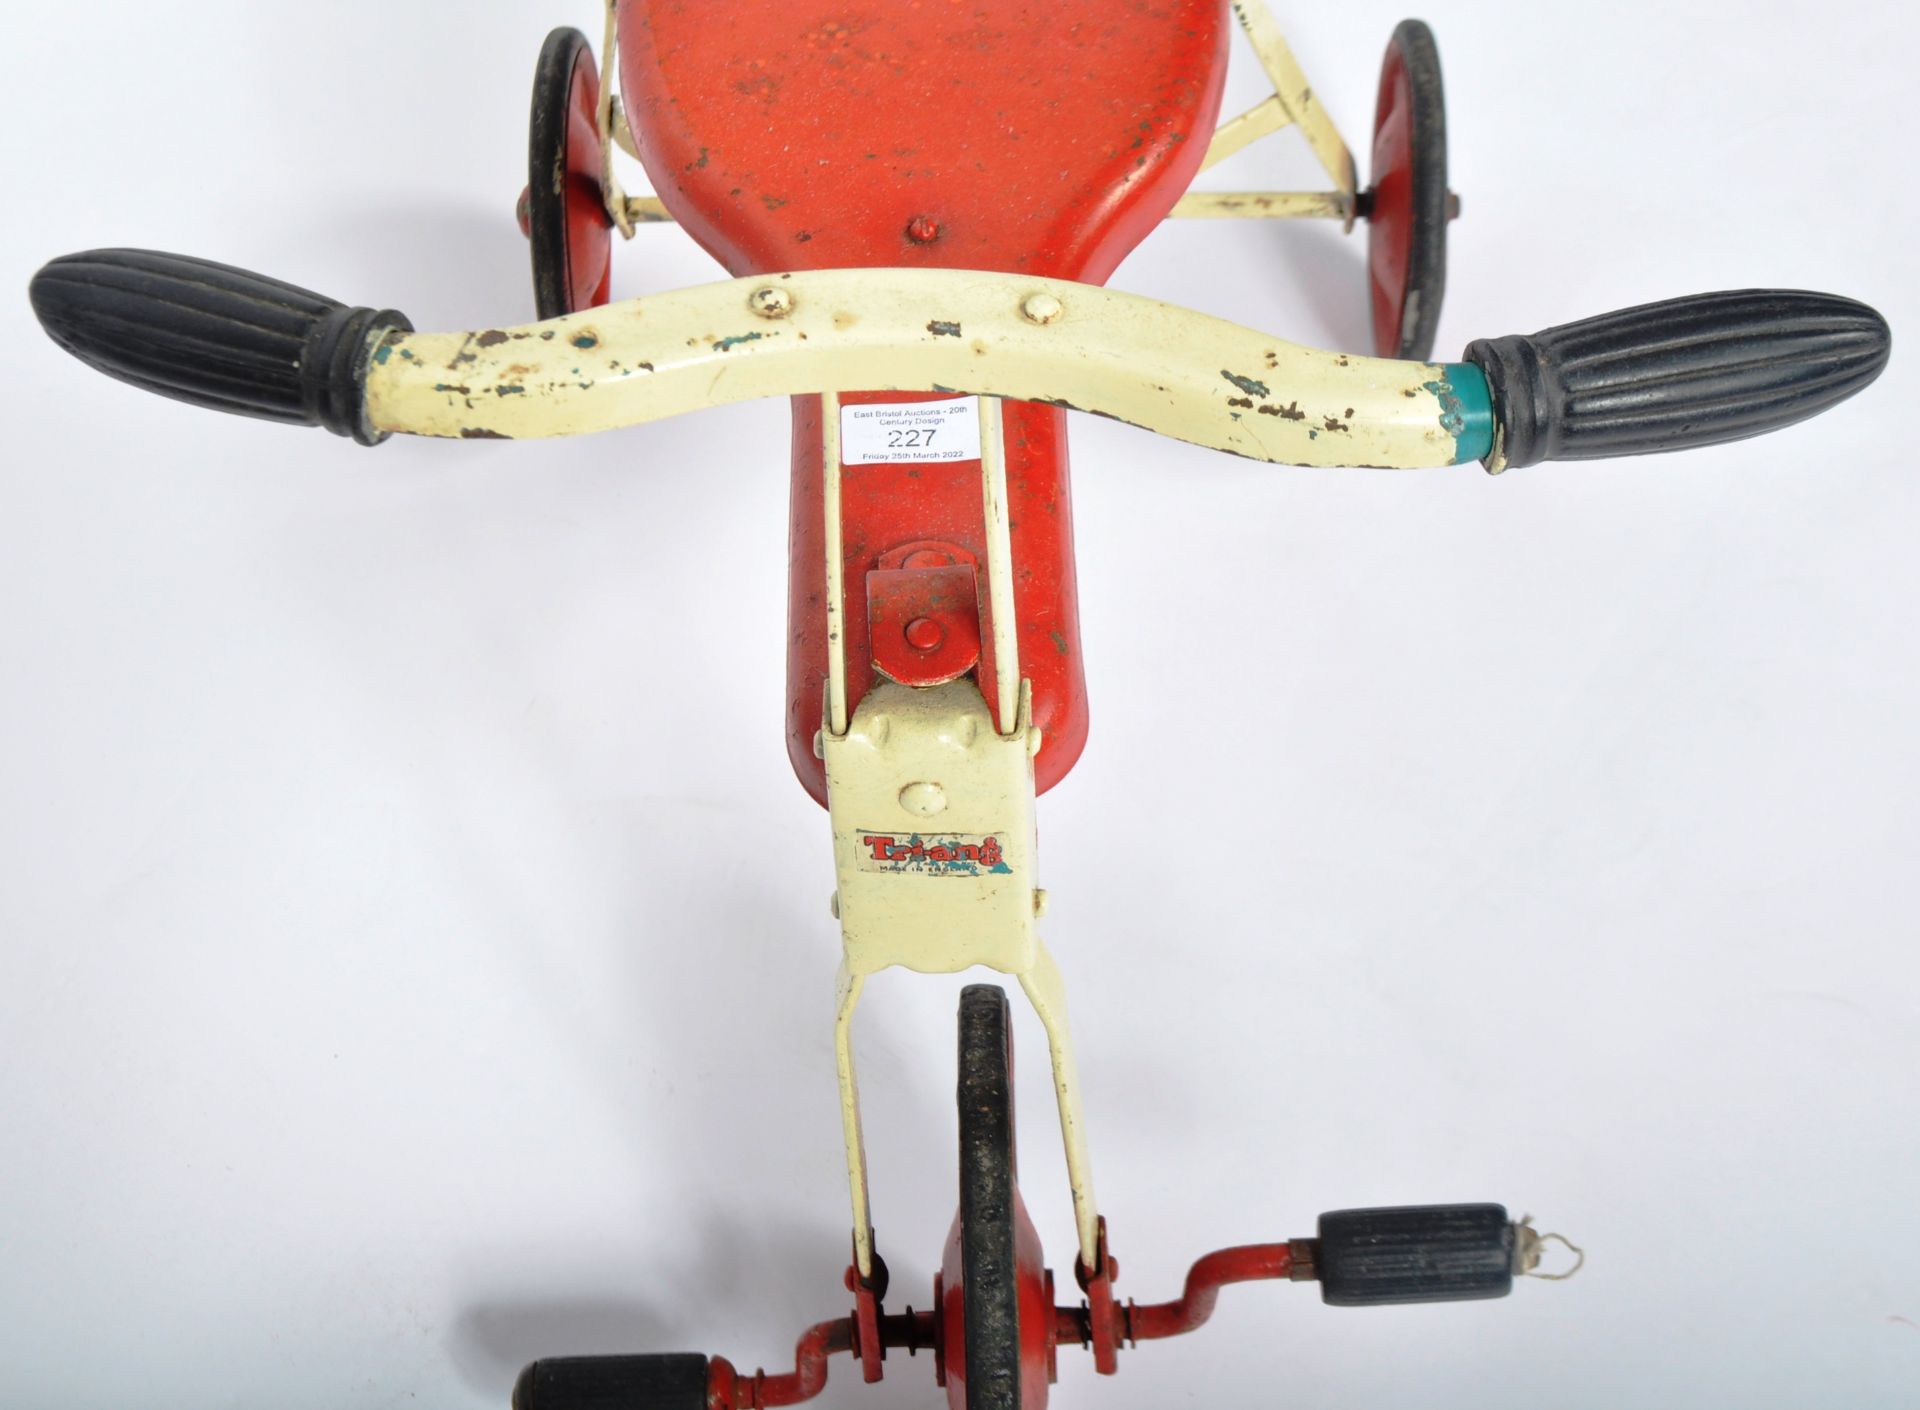 TRI-ANG - MID CENTURY CHILDS TRICYCLE WITH ORIGINAL PAINT - Image 3 of 7